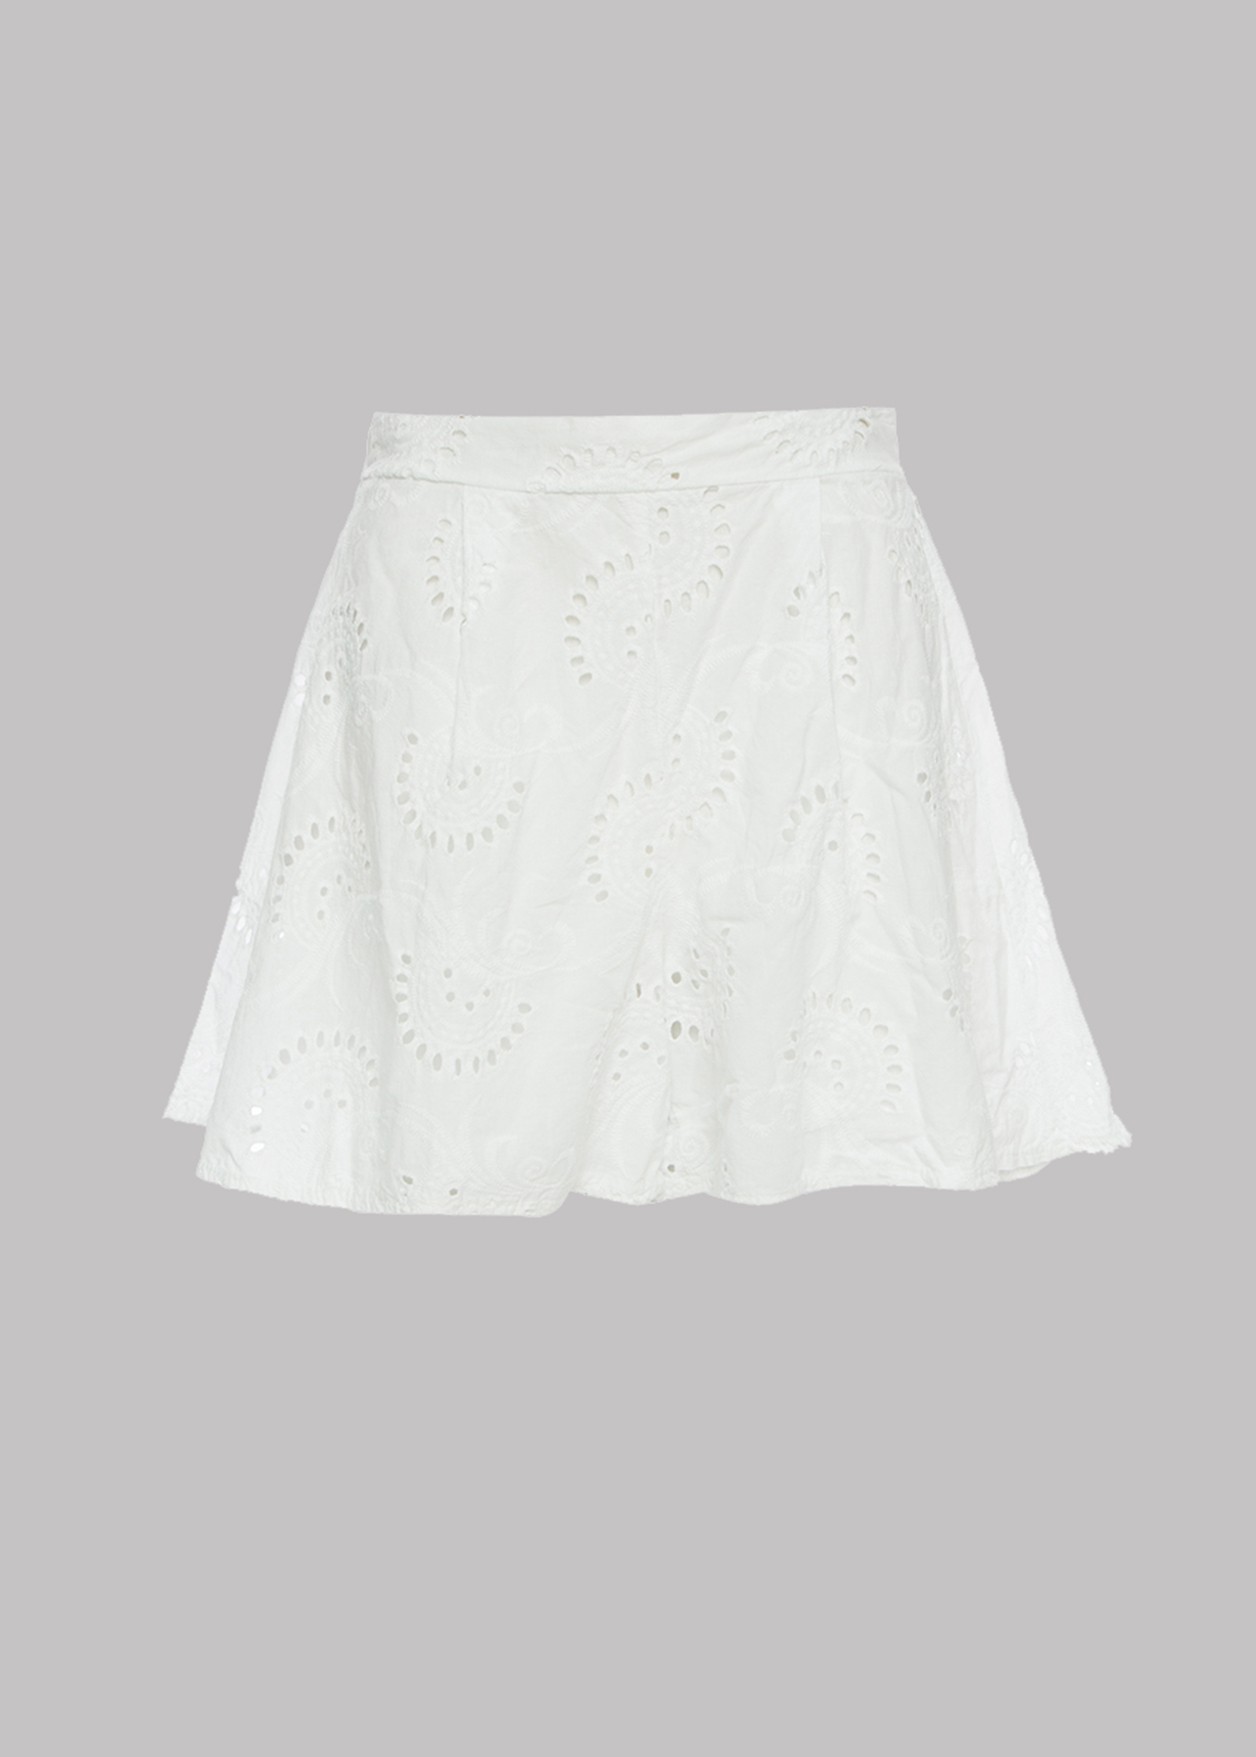 Broderie shorts